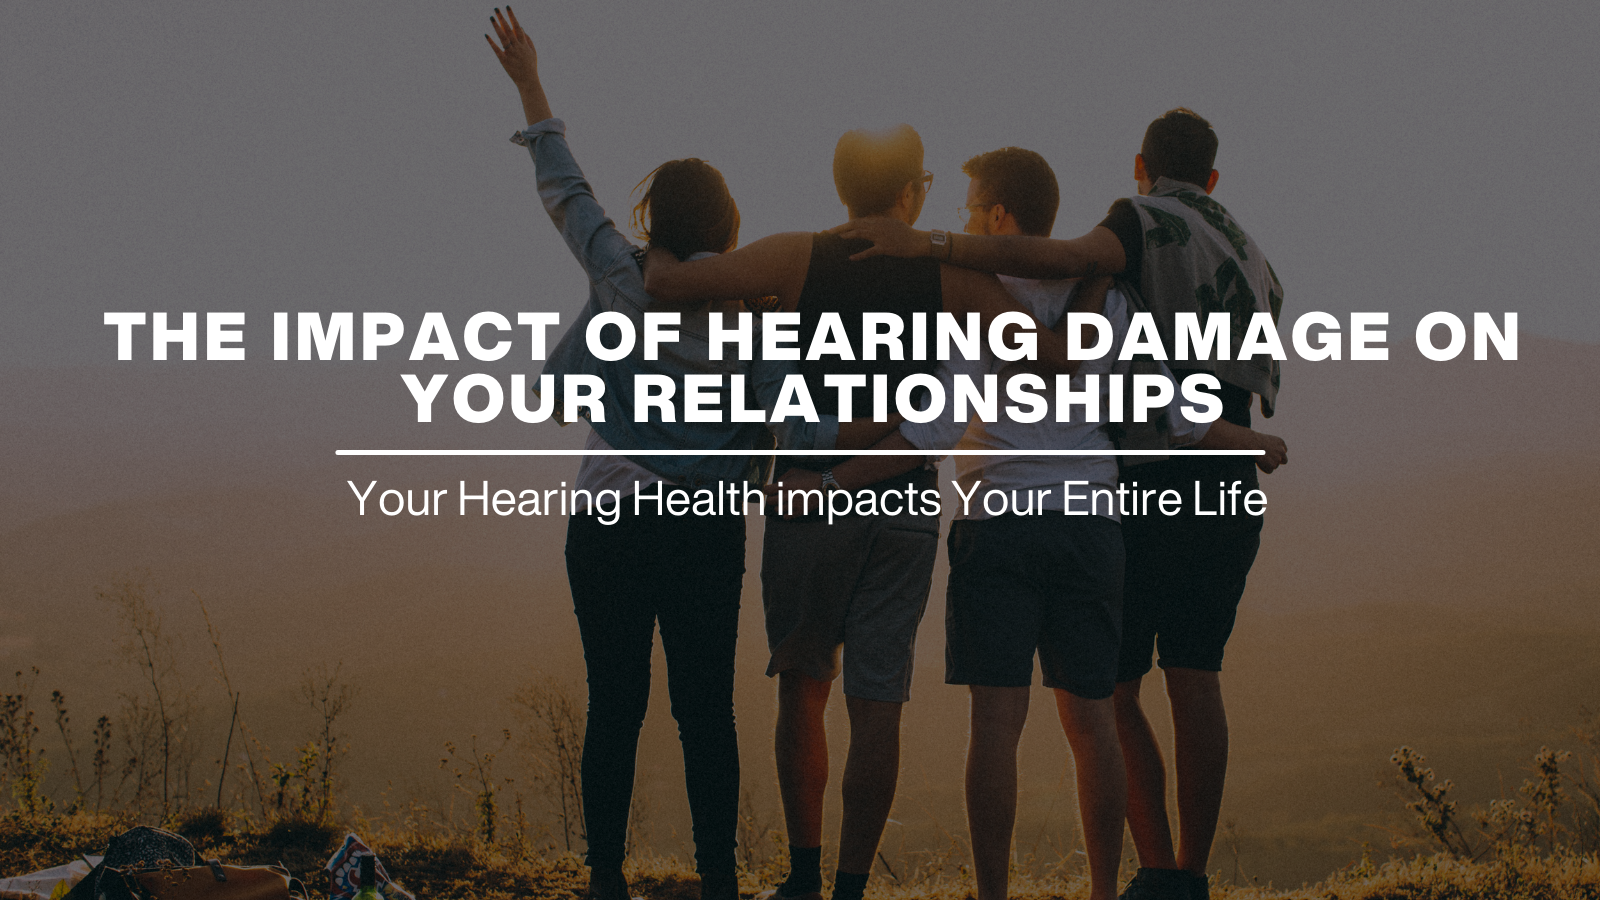 The Impact of Hearing Damage on Your Relationships